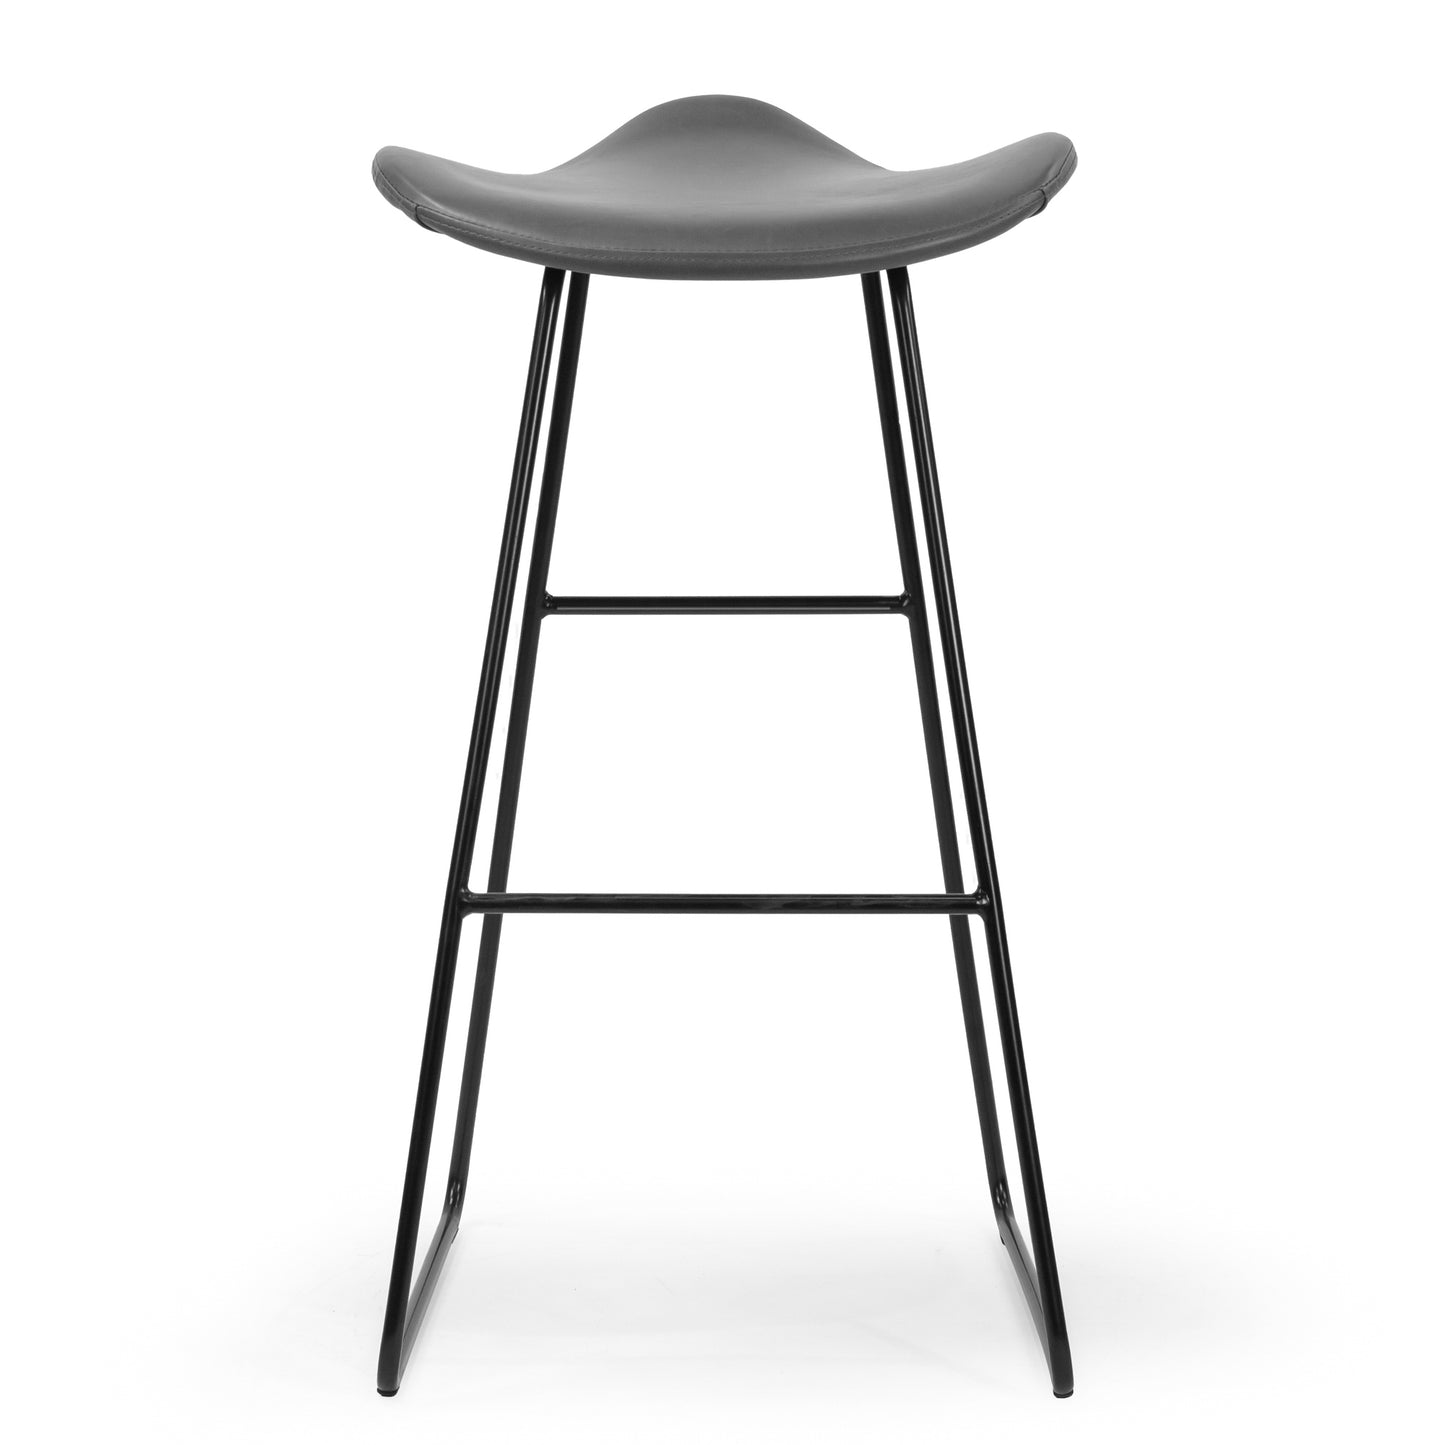 Set of 2 Aoi Grey Faux Leather Backless Barstool with Black Metal Legs